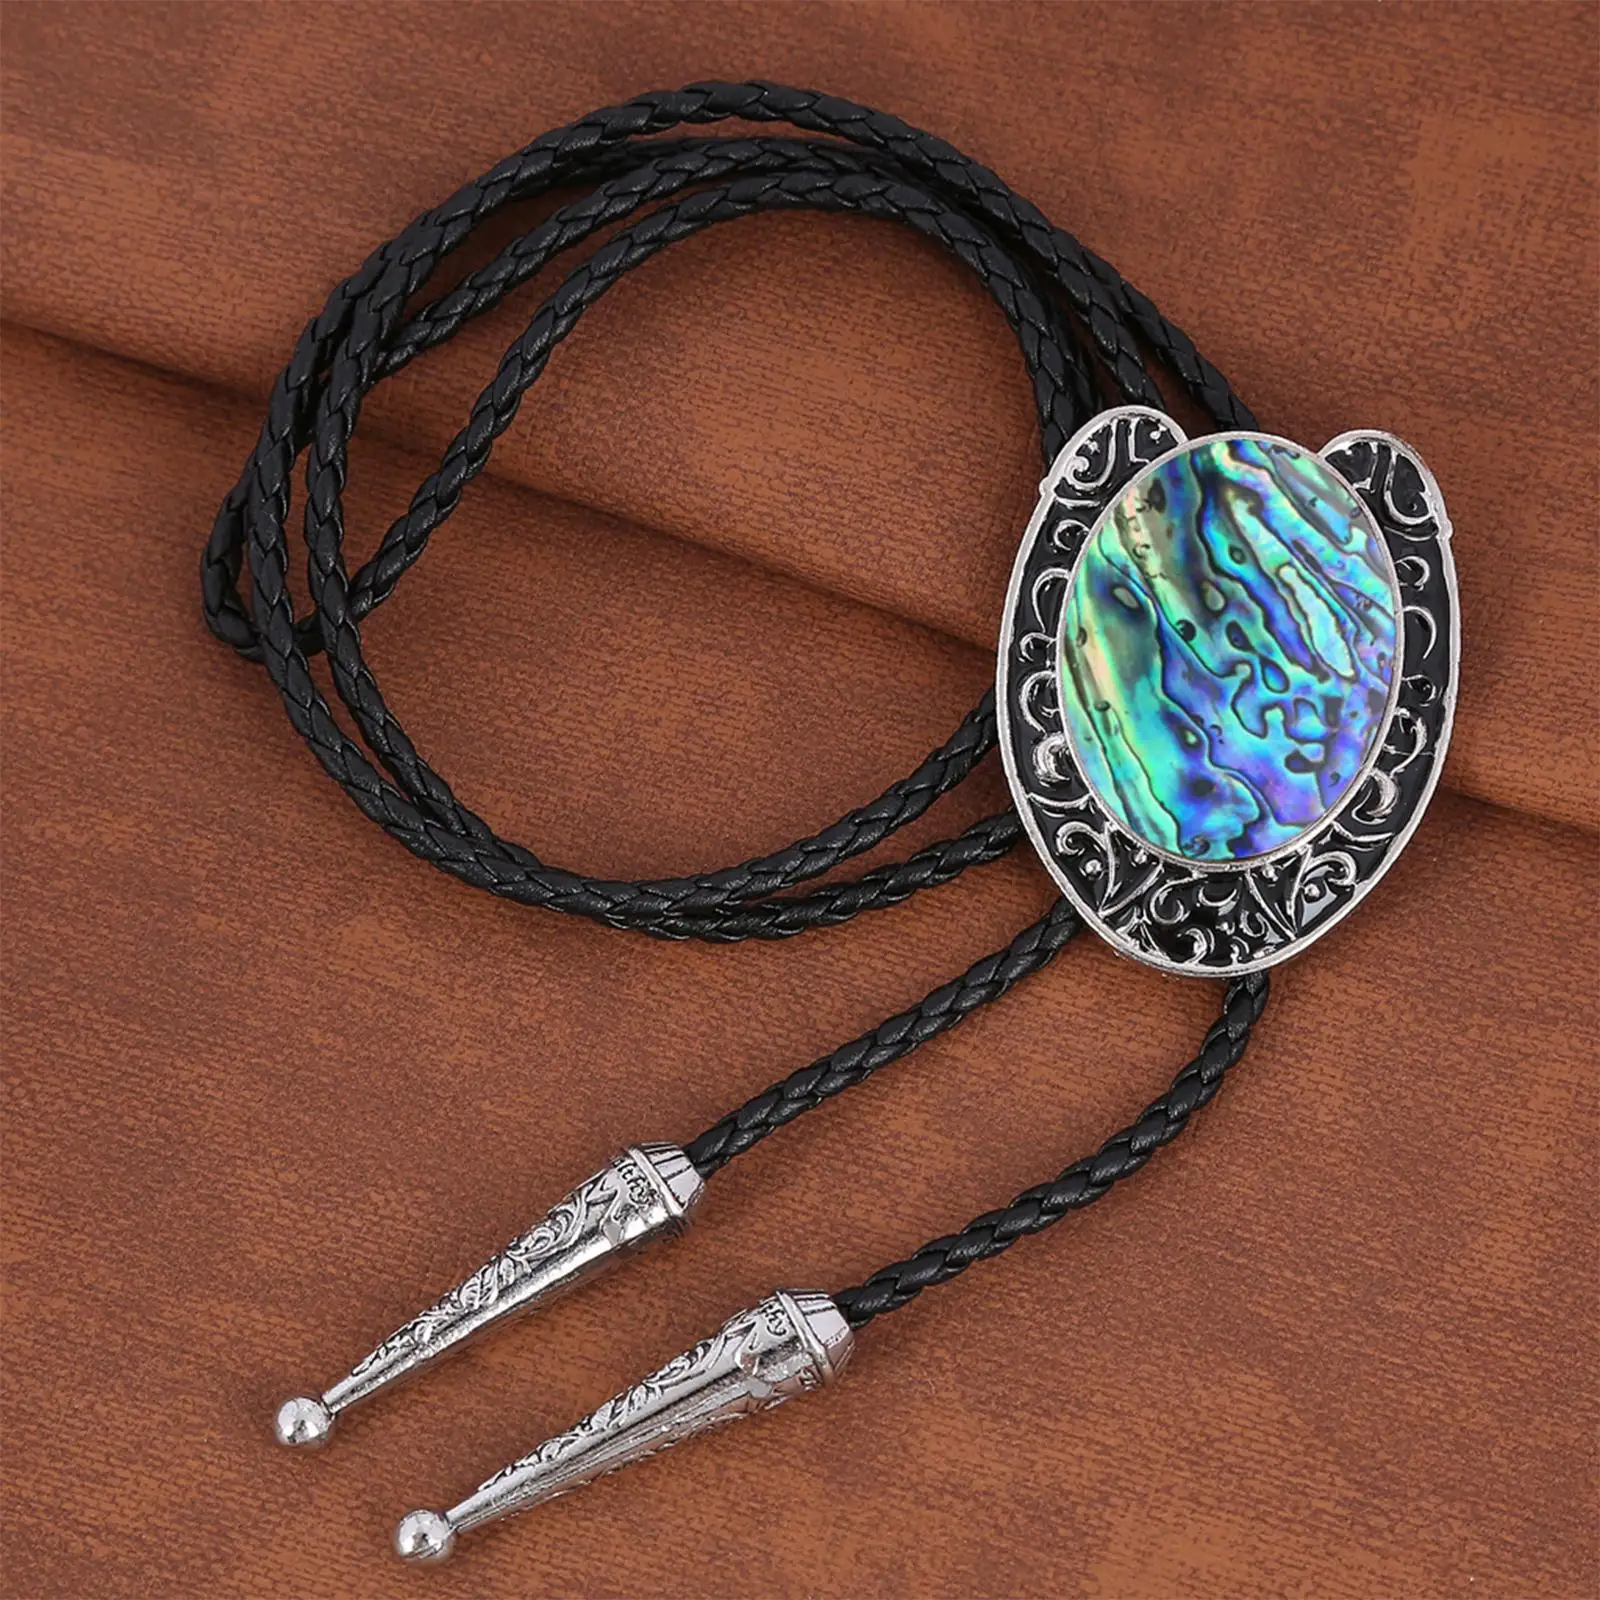 Western Bolo Tie Shirt Neck Ties Western Necklace Tie Costume Accessory with Pendant for Men Women Teens Adults Birthday Gift